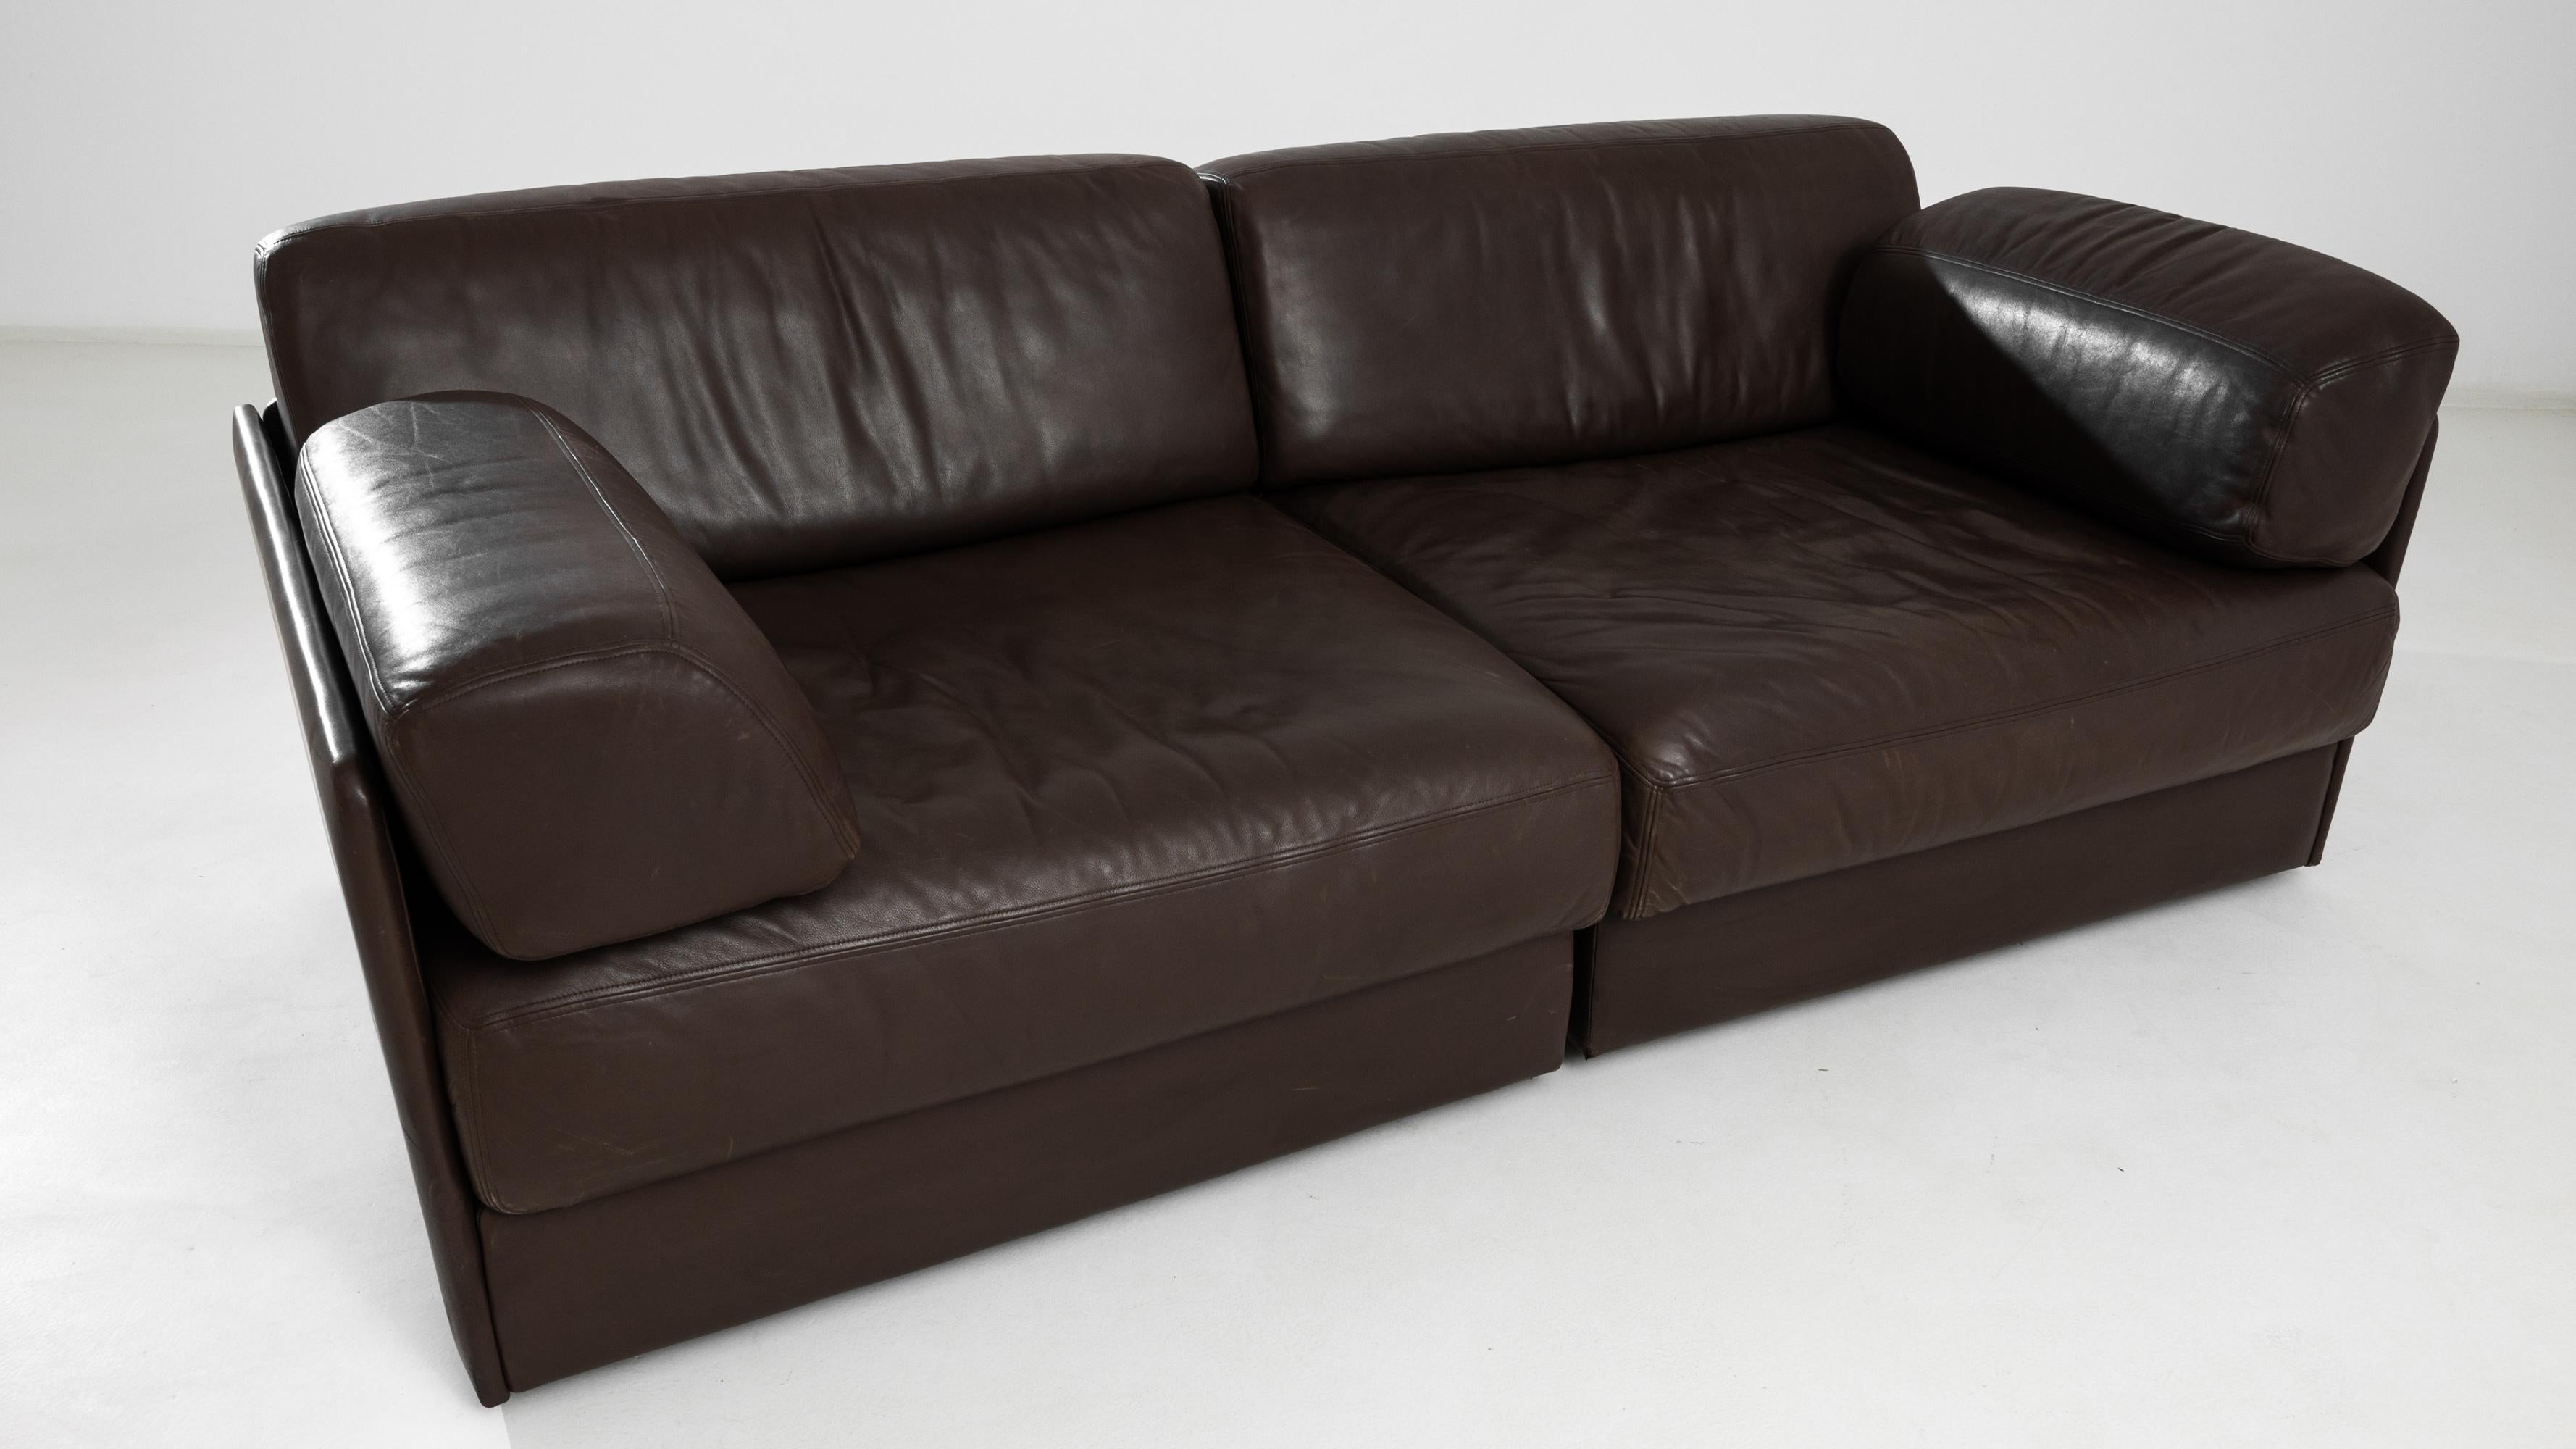 1970s Swiss Modular Leather Sofa DS76 by De Sede For Sale 2